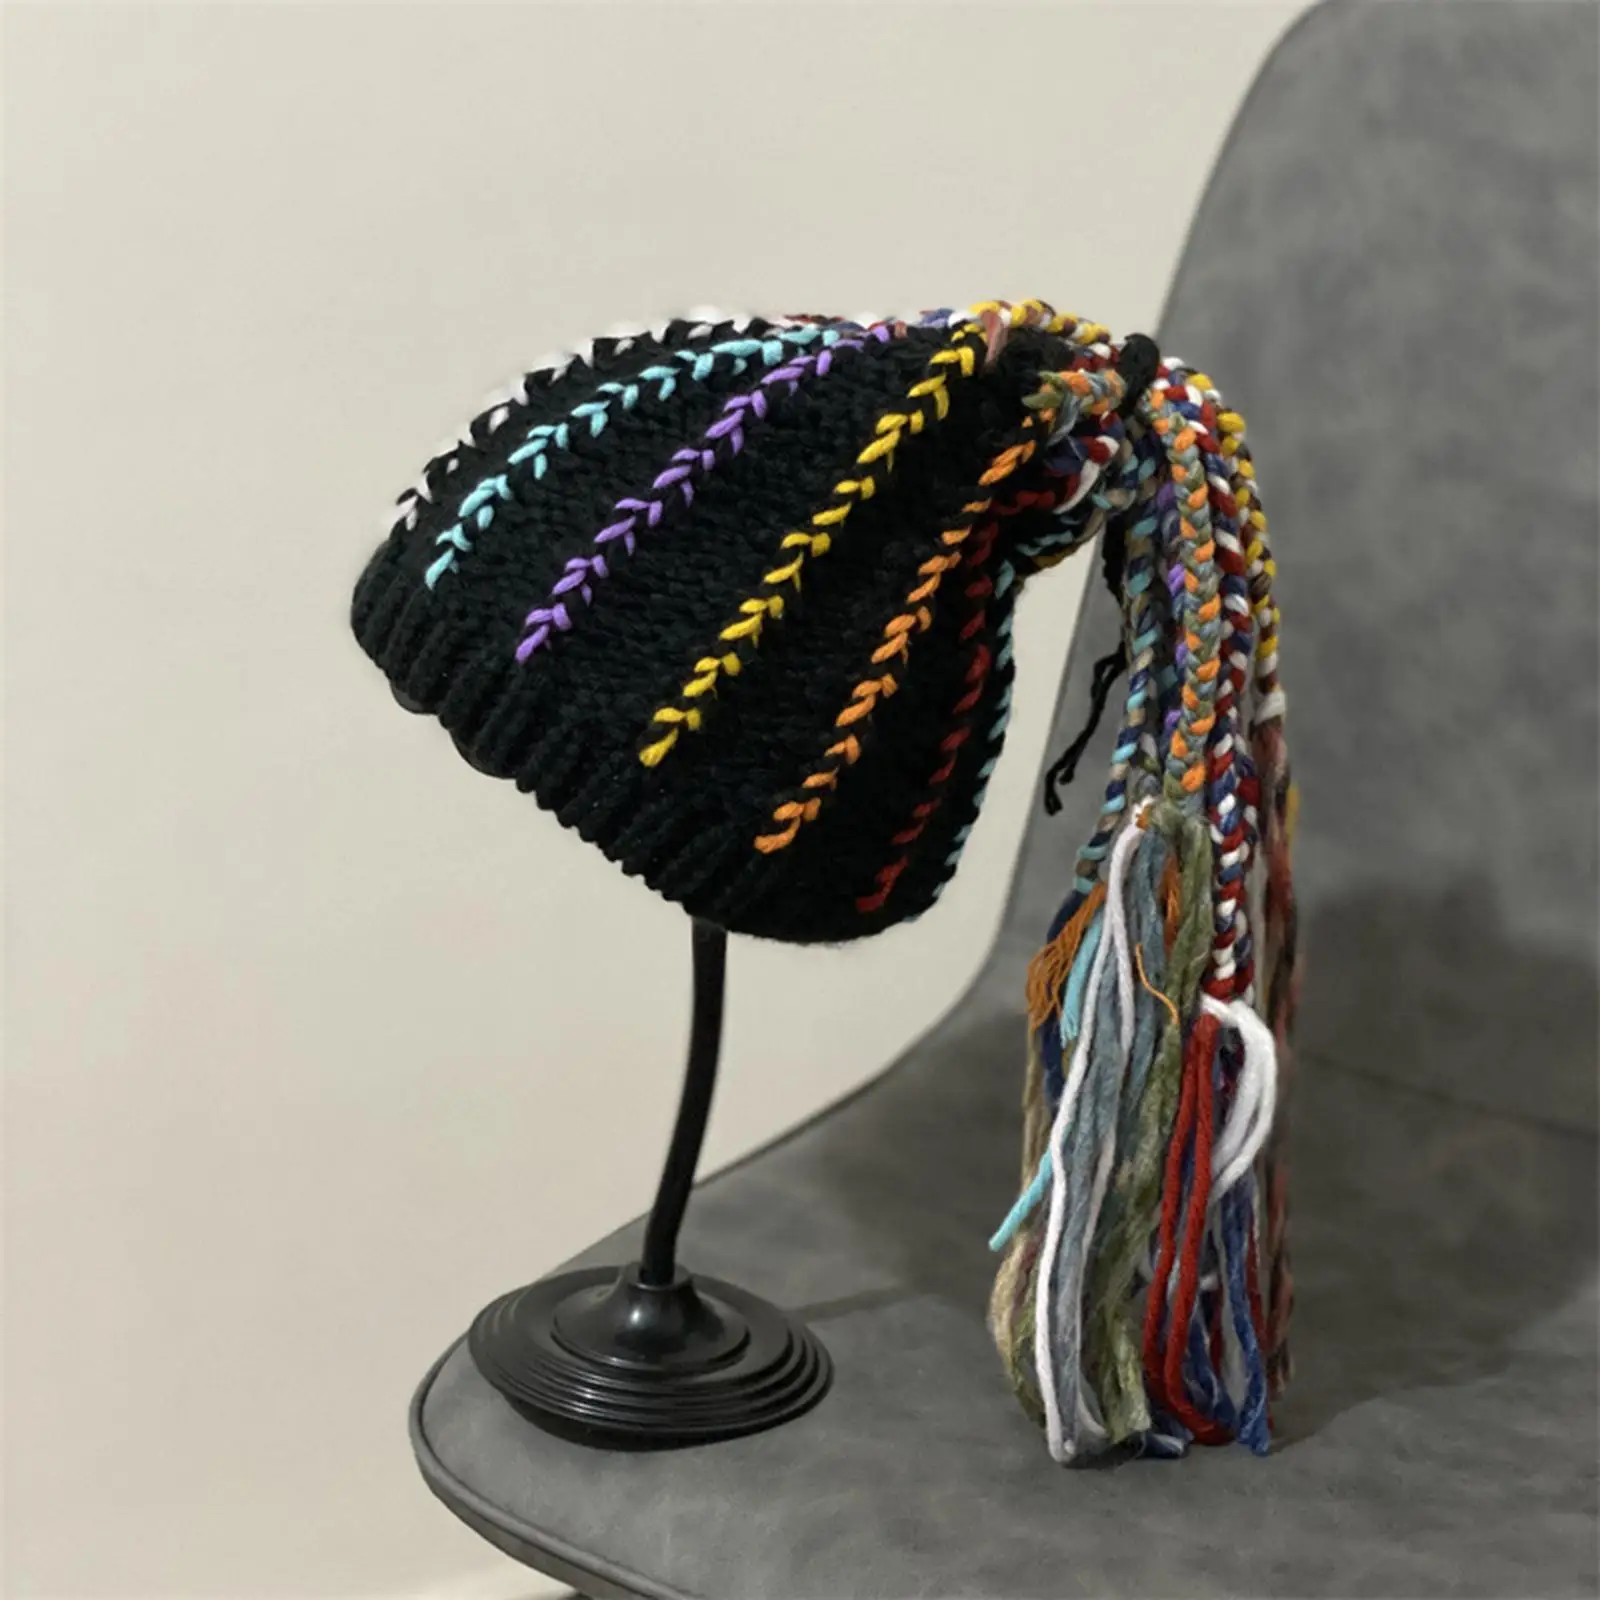 Novelty Knit Wig Hat Wig Beanie Warm Funny Caps for Teens Adults Outdoor